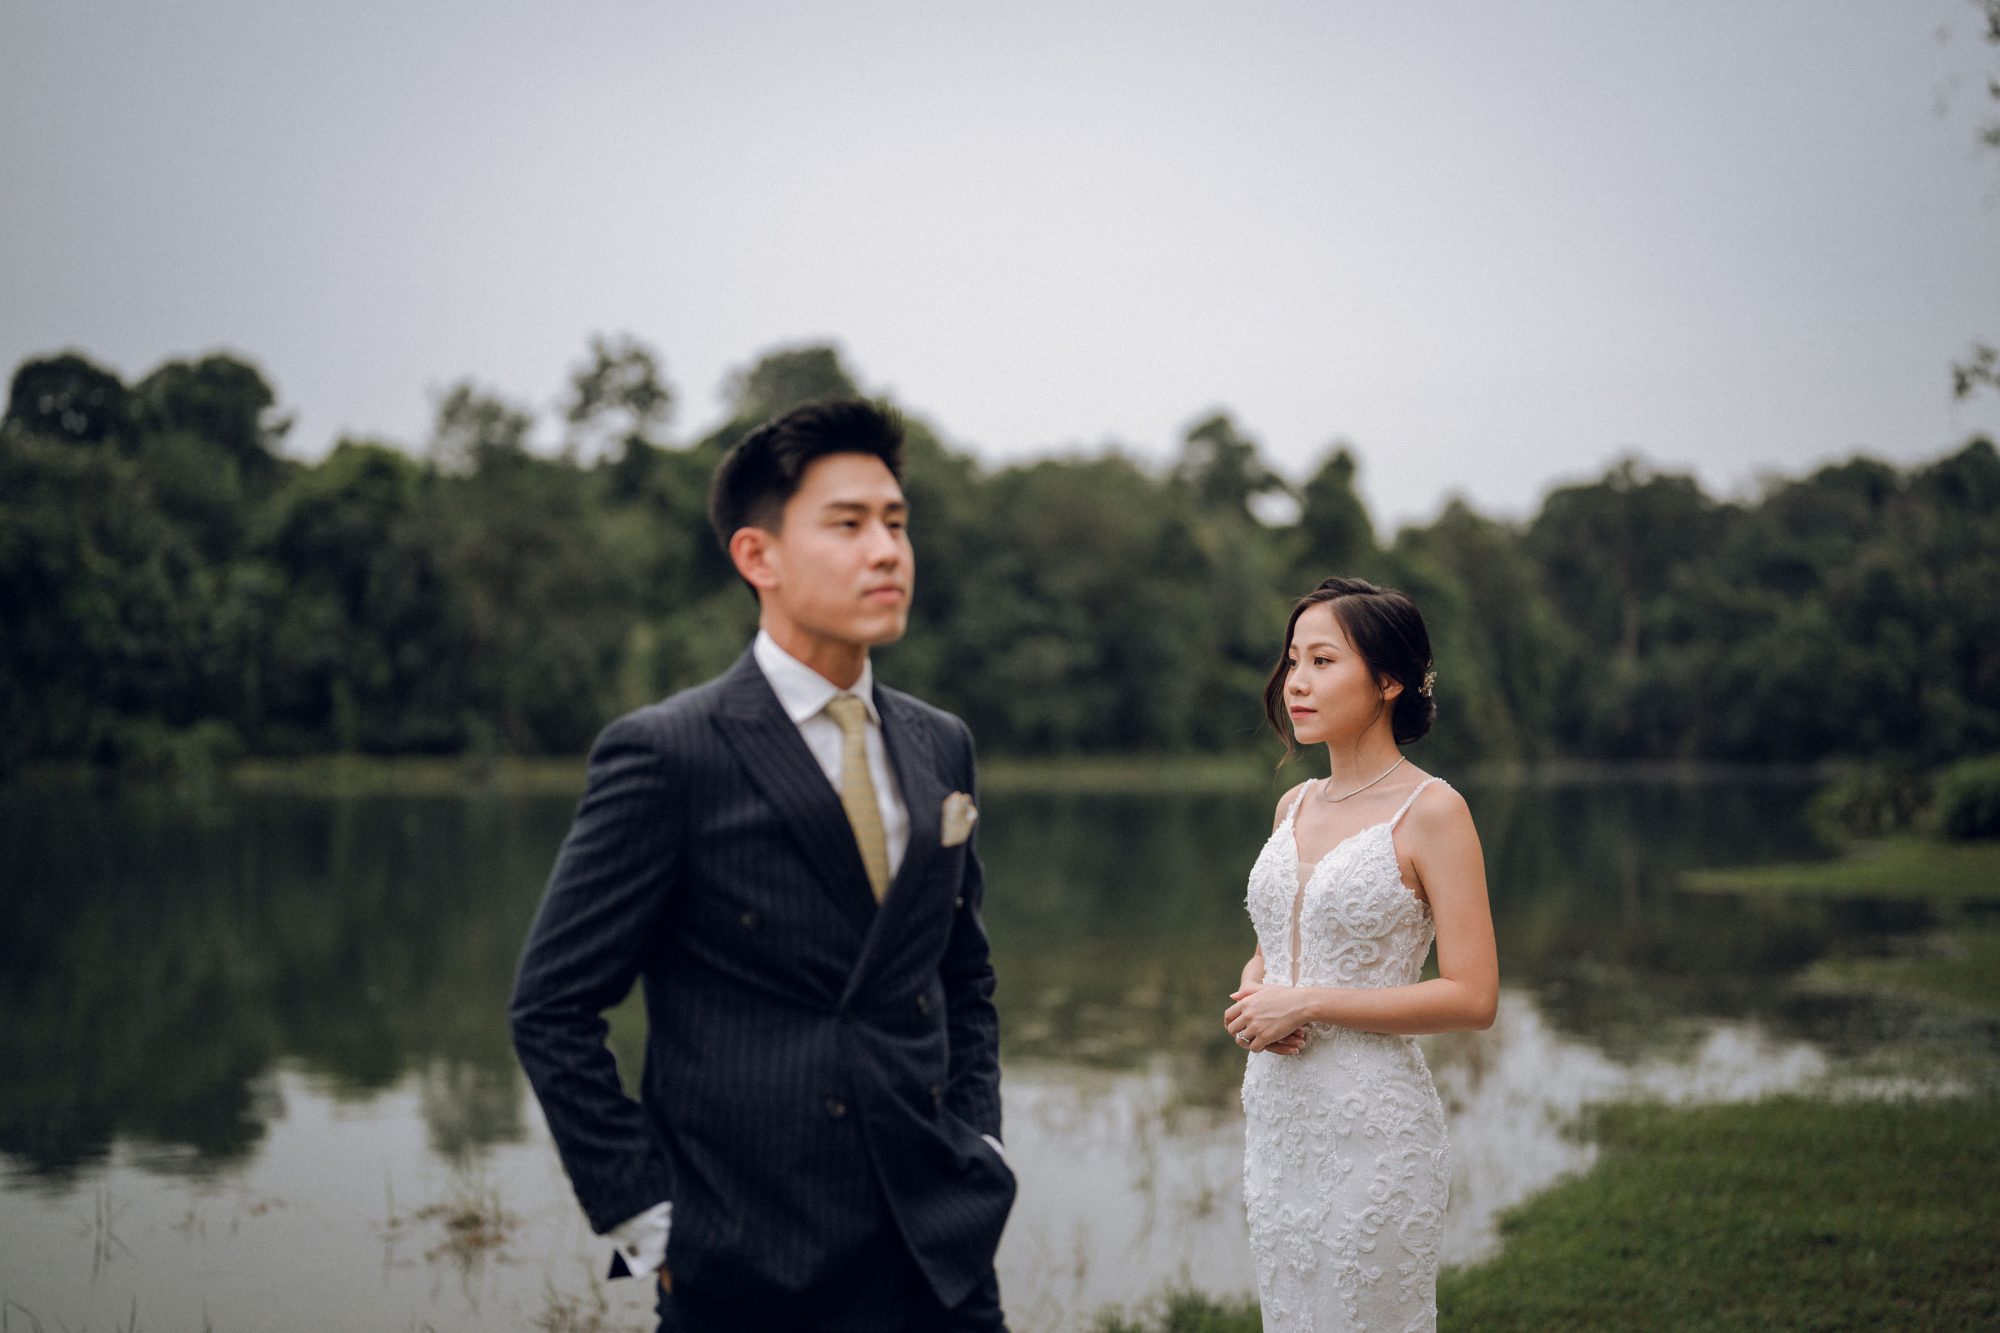 Prewedding Photoshoot At Whisky Library, Gillman Barracks And Lower Peirce Reservoir by Michael on OneThreeOneFour 33